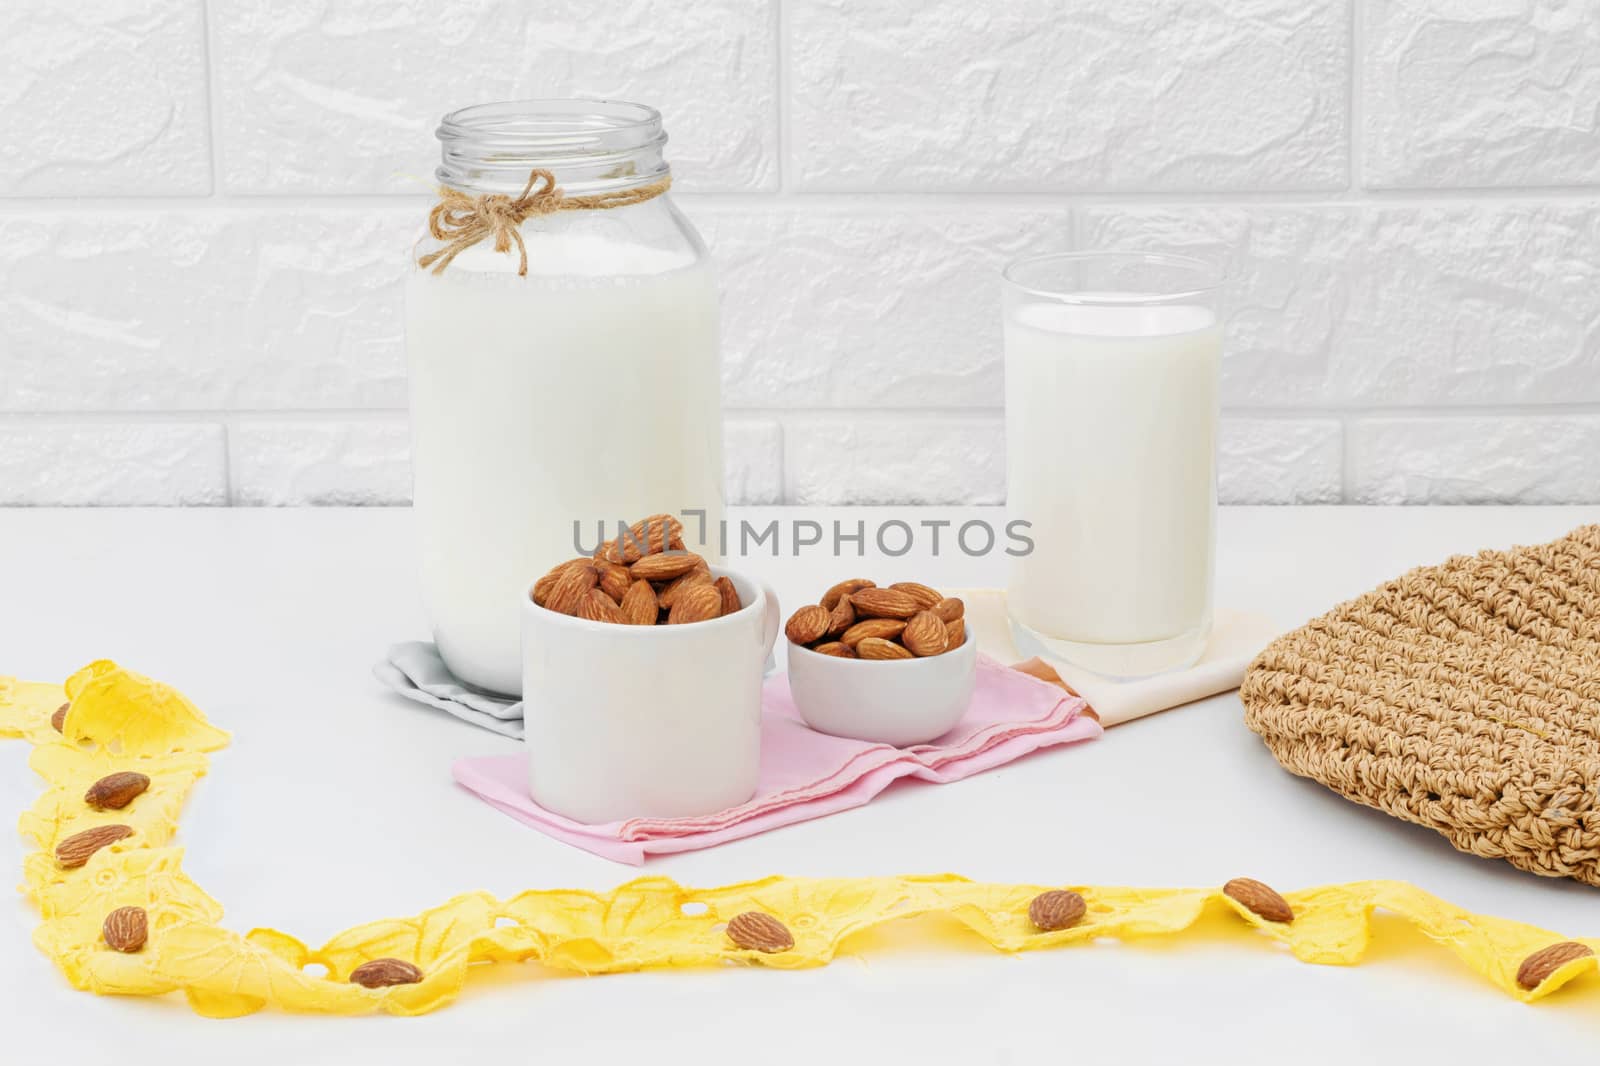 Milk Almonds in a glass on a white background by sompongtom